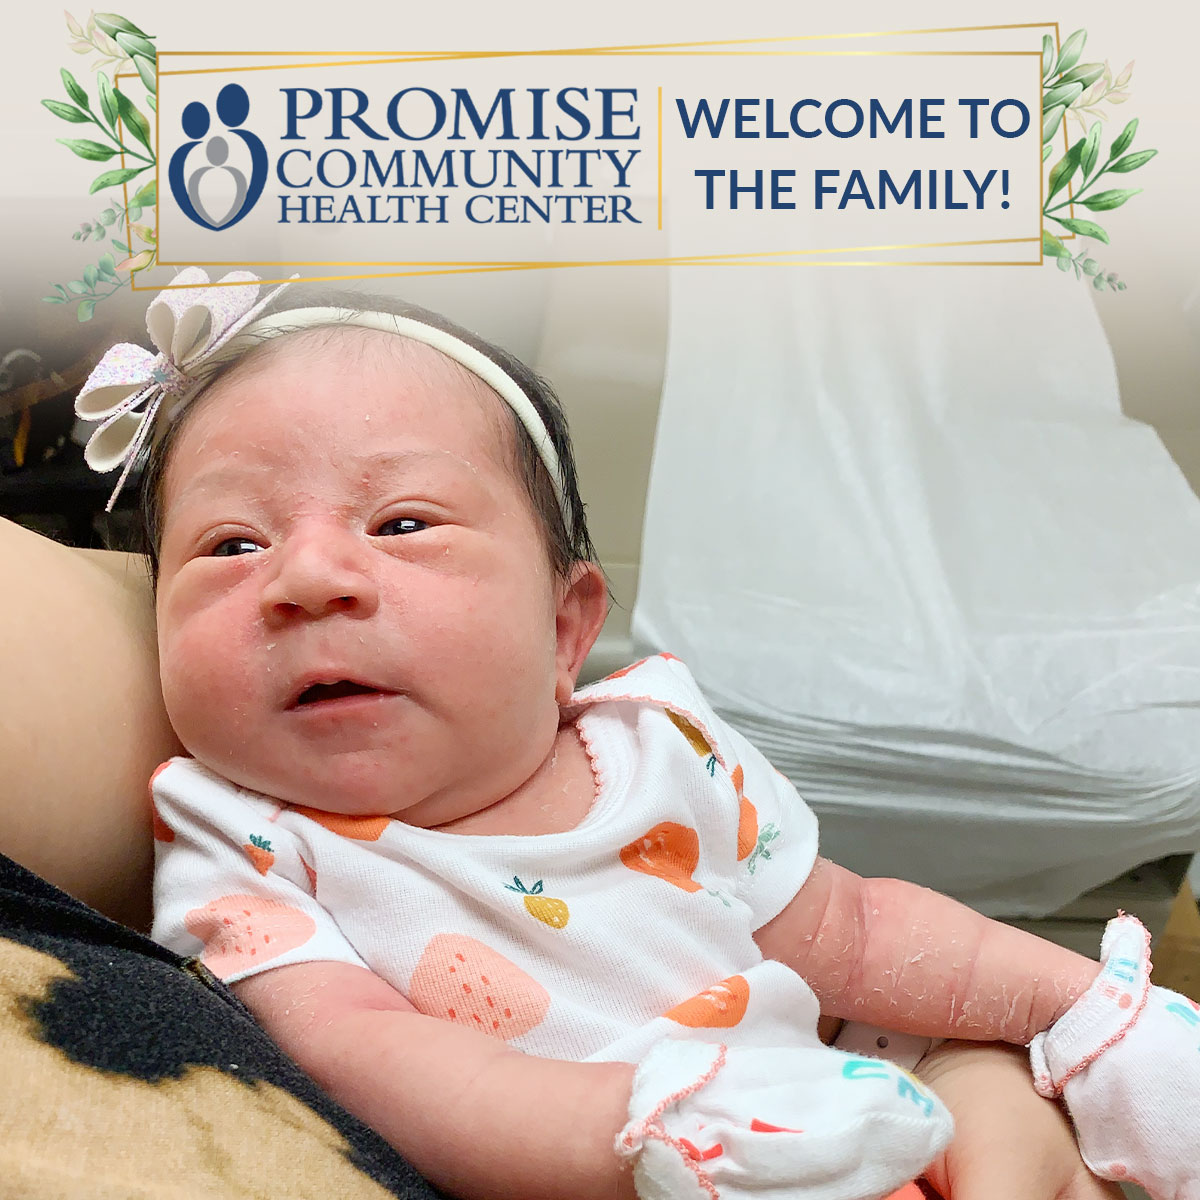 Hospital birth in Sioux Center, Iowa |Promise Community Health Center in Sioux Center, Iowa | Home births in northwest Iowa, Home births in southeast South Dakota, Home births in southwest Minnesota | Home births in Sioux Falls South Dakota, Home births in Beresford South Dakota, Home births in Sioux City IA, Home births in LeMars IA, Home births in Worthington MN, Home births in Iowa, Home births in South Dakota, Home births in Minnesota